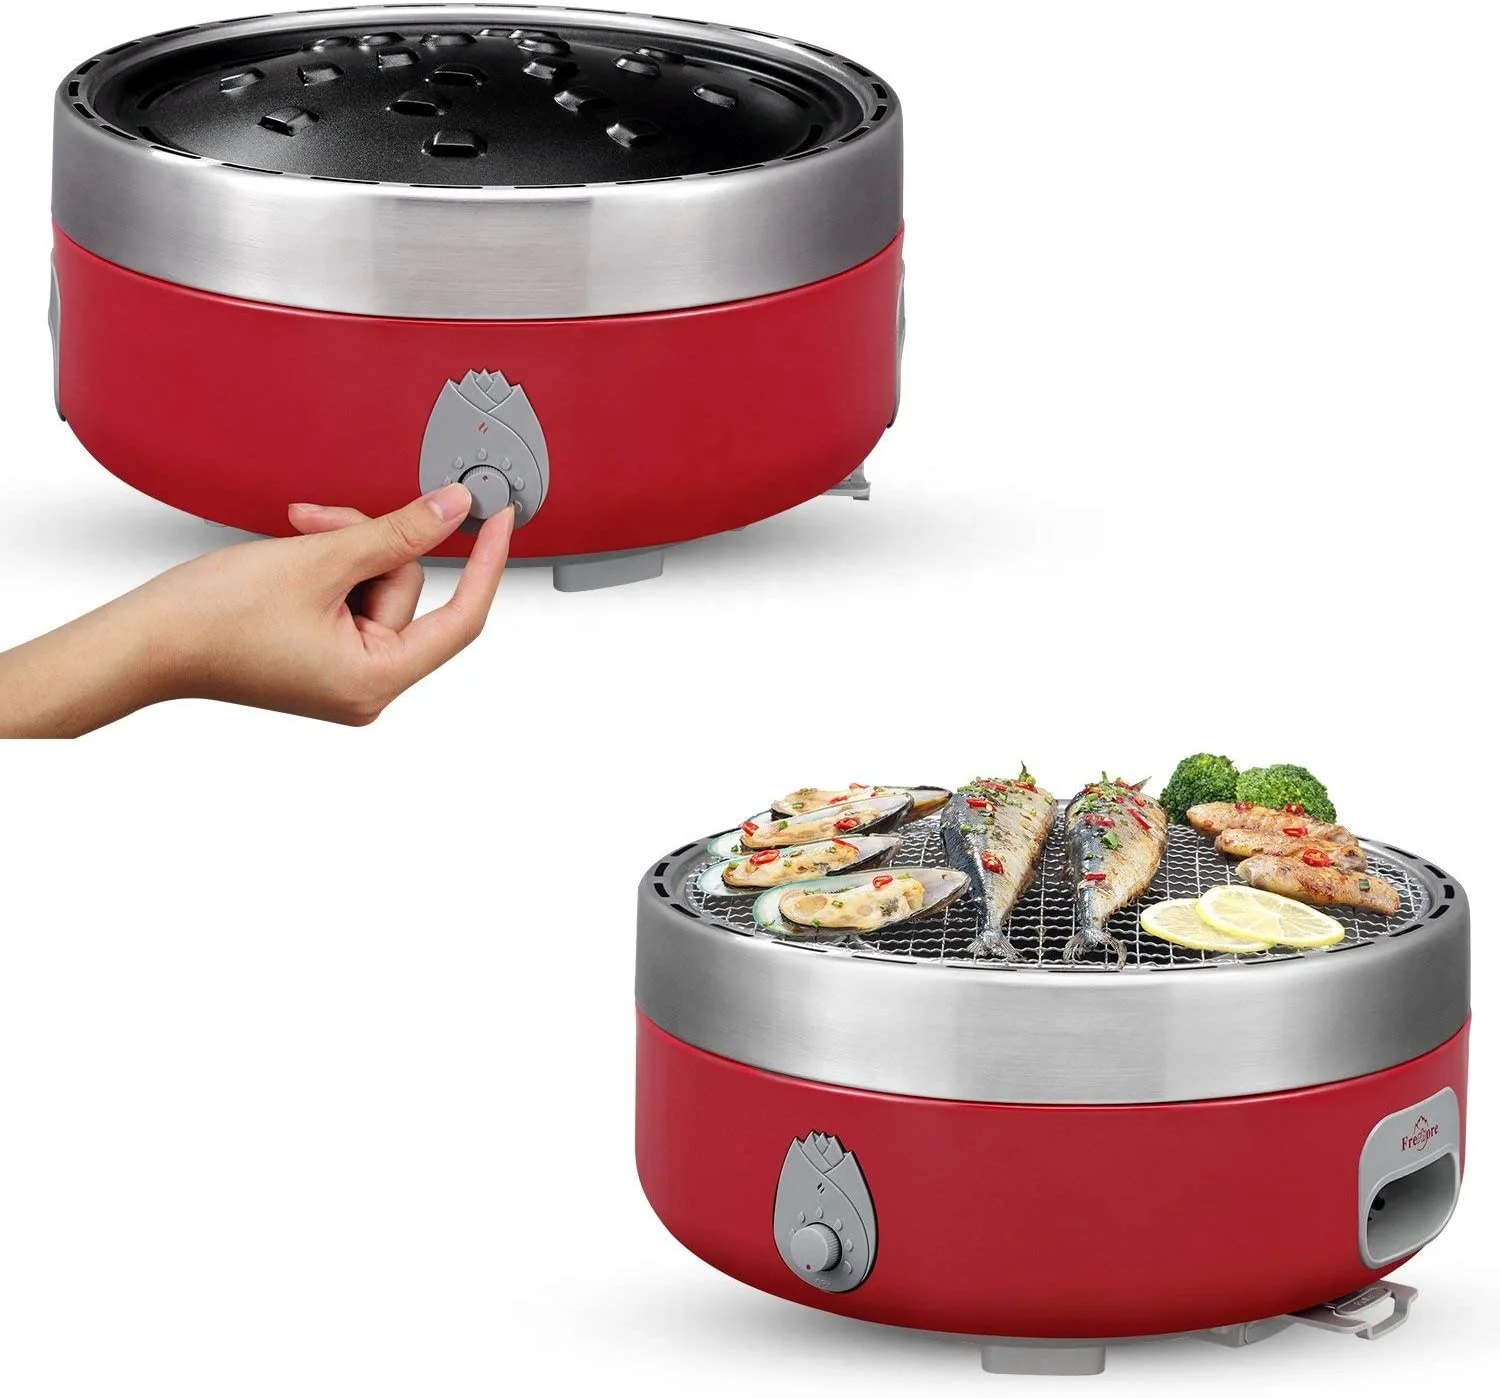 

Portable Smokeless Charcoal Grill Barbecue BBQ Grill Convenience to Carry Grest Gift for BBQ Food Lovers to Camping